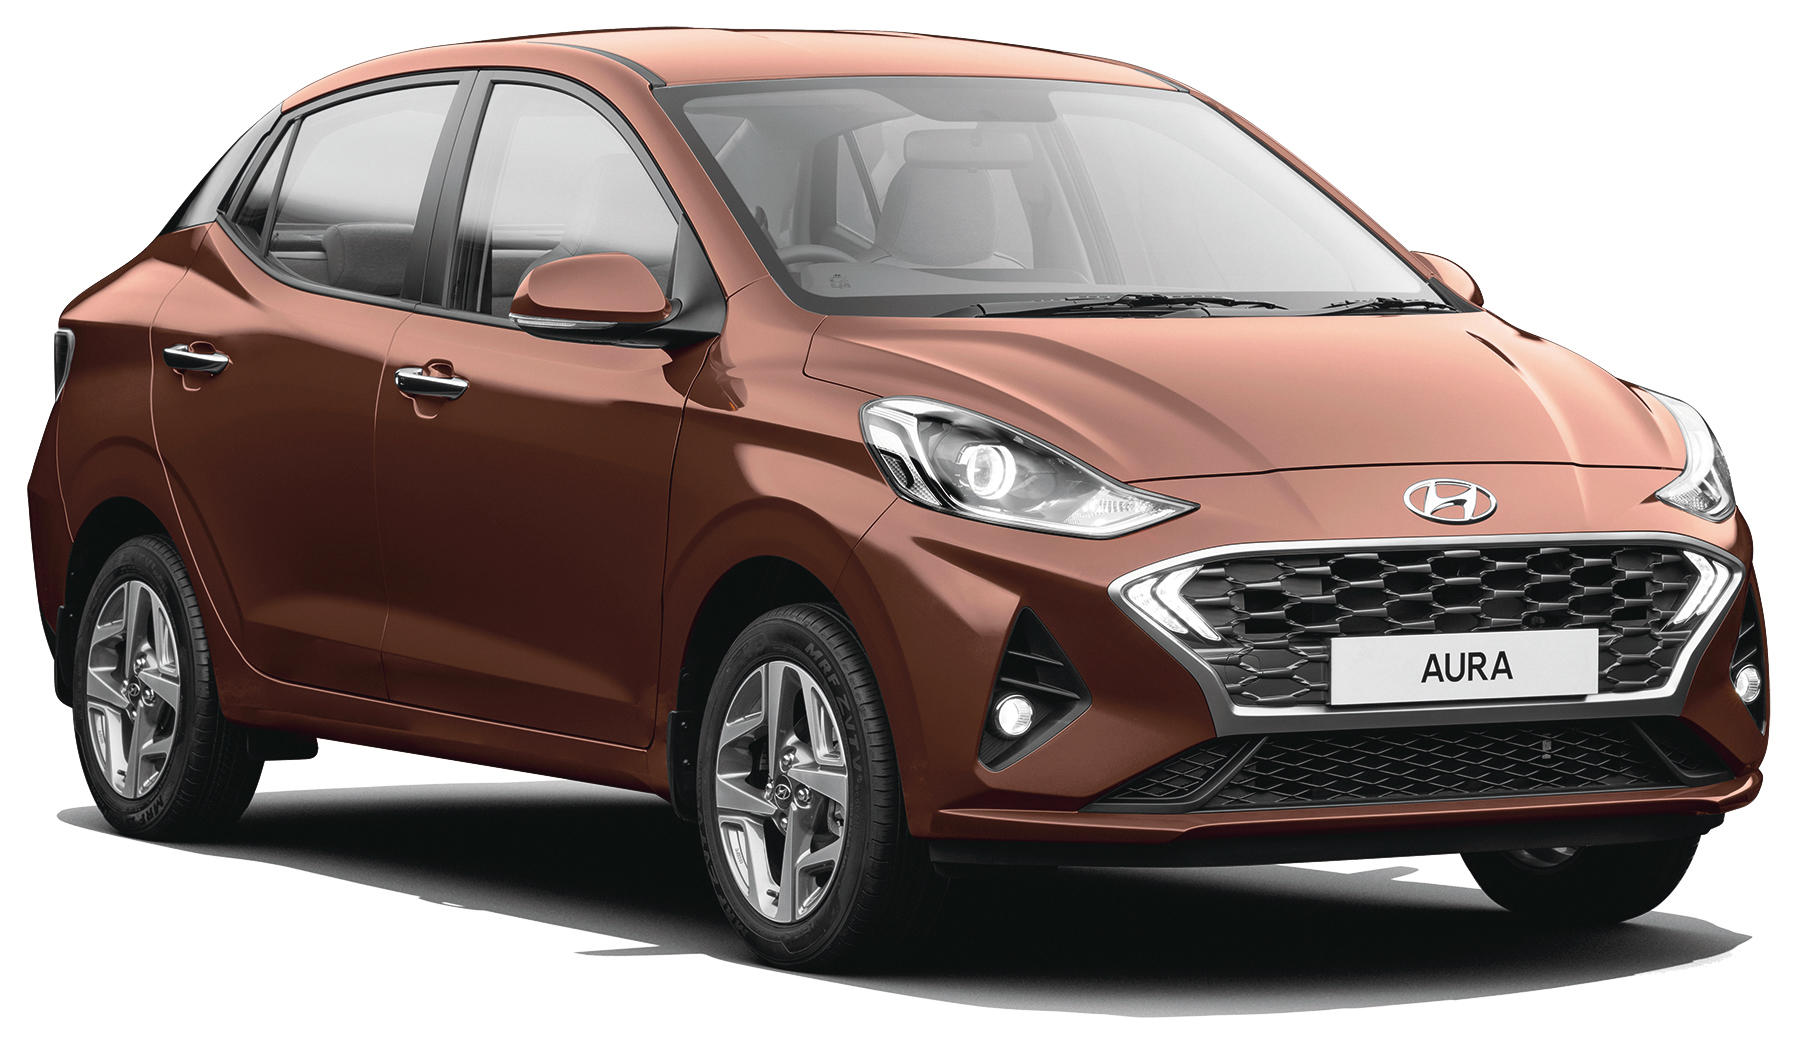 Hyundai will have an open market to sell its diesel Aura and other models when its bigger rival Maruti Suzuki will have only petrol to offer from its portfolio.